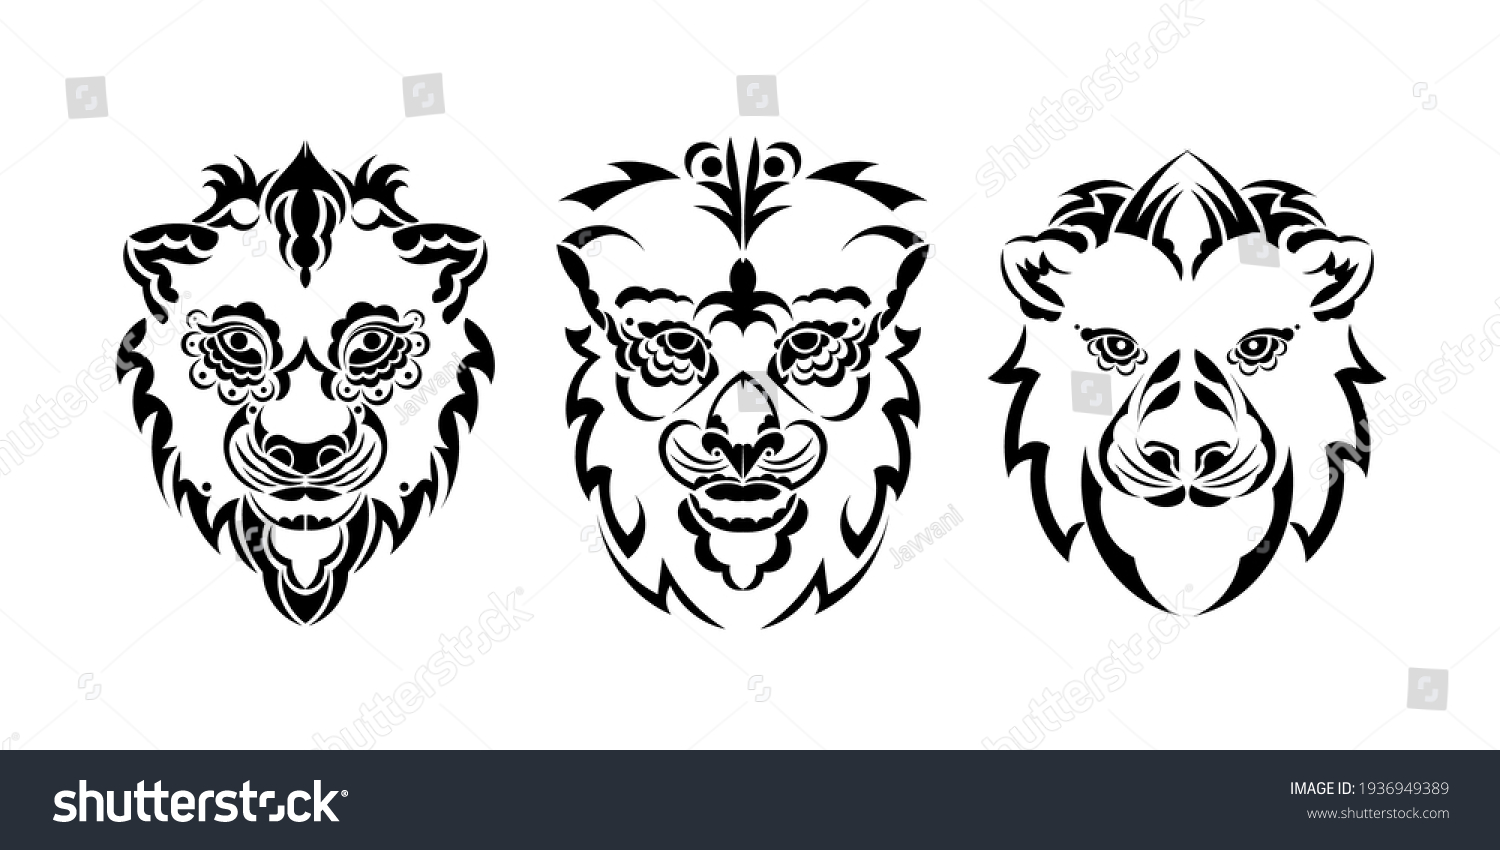 7. "Lion Tattoos for Courage and Dominance" - wide 8